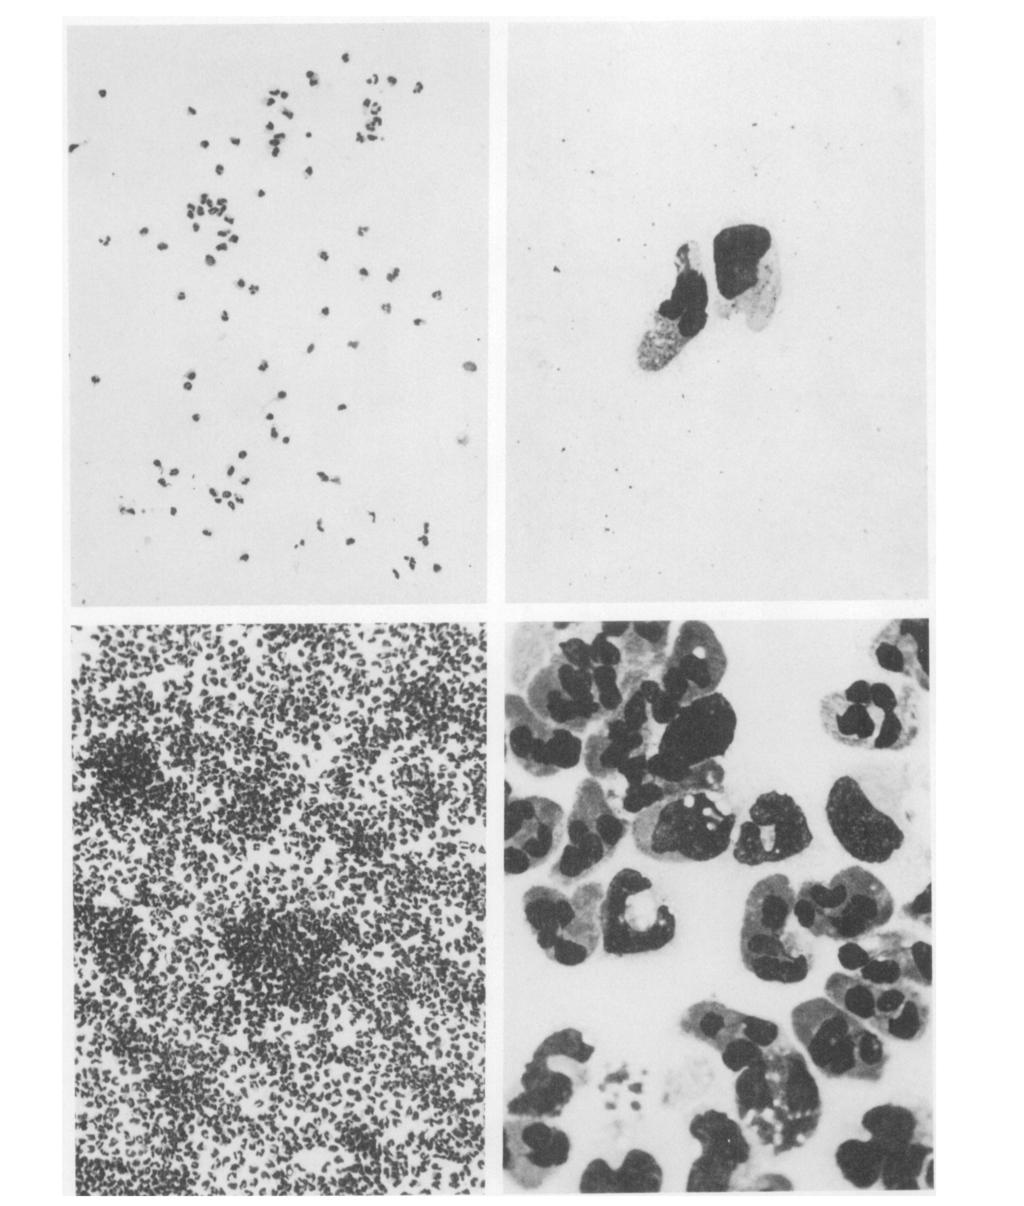 Higher power of a portion of the response shown in Figure 5 in a prekallikrein-deficient patient. The responding leukocytes are neutrophils and monocytes as shown. Leishman's stain (X1,000). FIG.